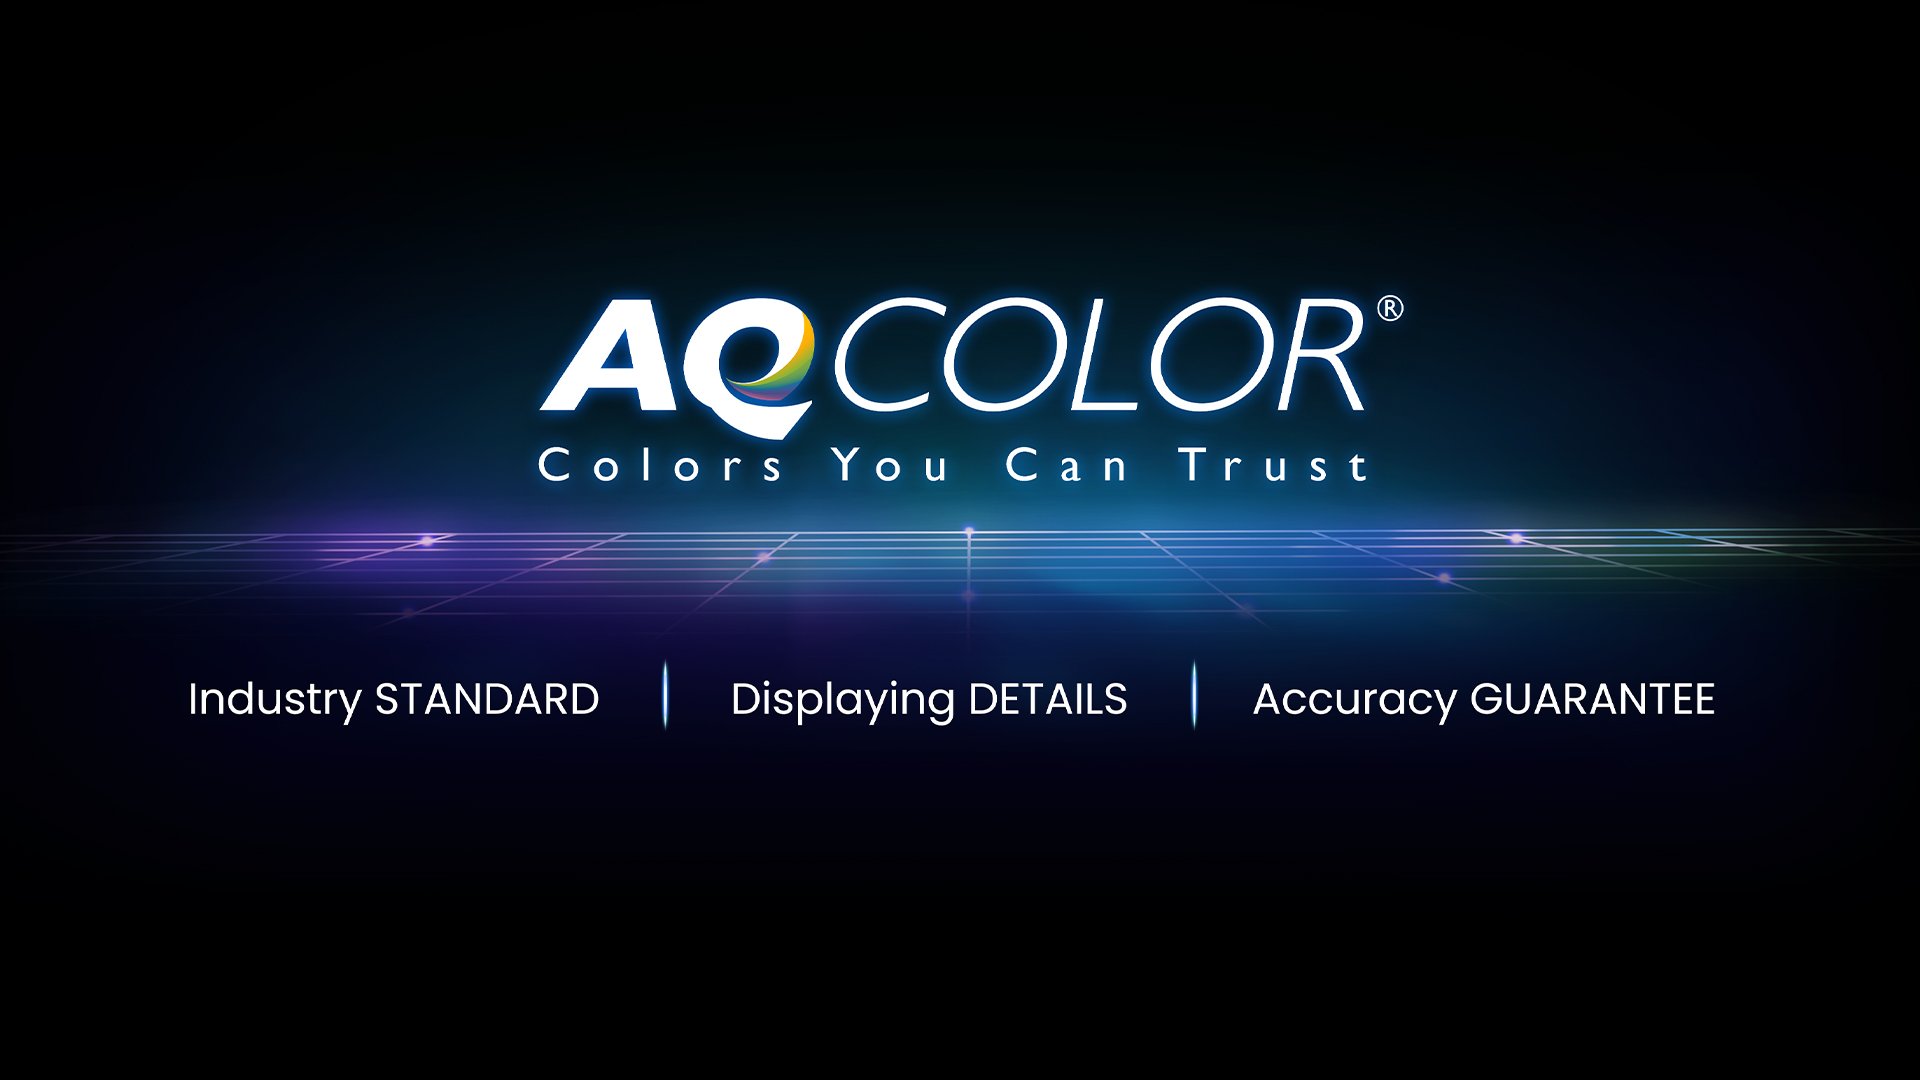 BenQ AQCOLOR technology delivers 'Accurate Reproduction.' This translates to the display of colour precisely as it is intended to appear. With Delta E ≤ 1.5 and BenQ ICCsync, SW272Q offers out-of-the-box and easy-to-reach colour accuracy. The 16-bit 3D lookup table (LUT) improves colour blending for precise reproduction. 